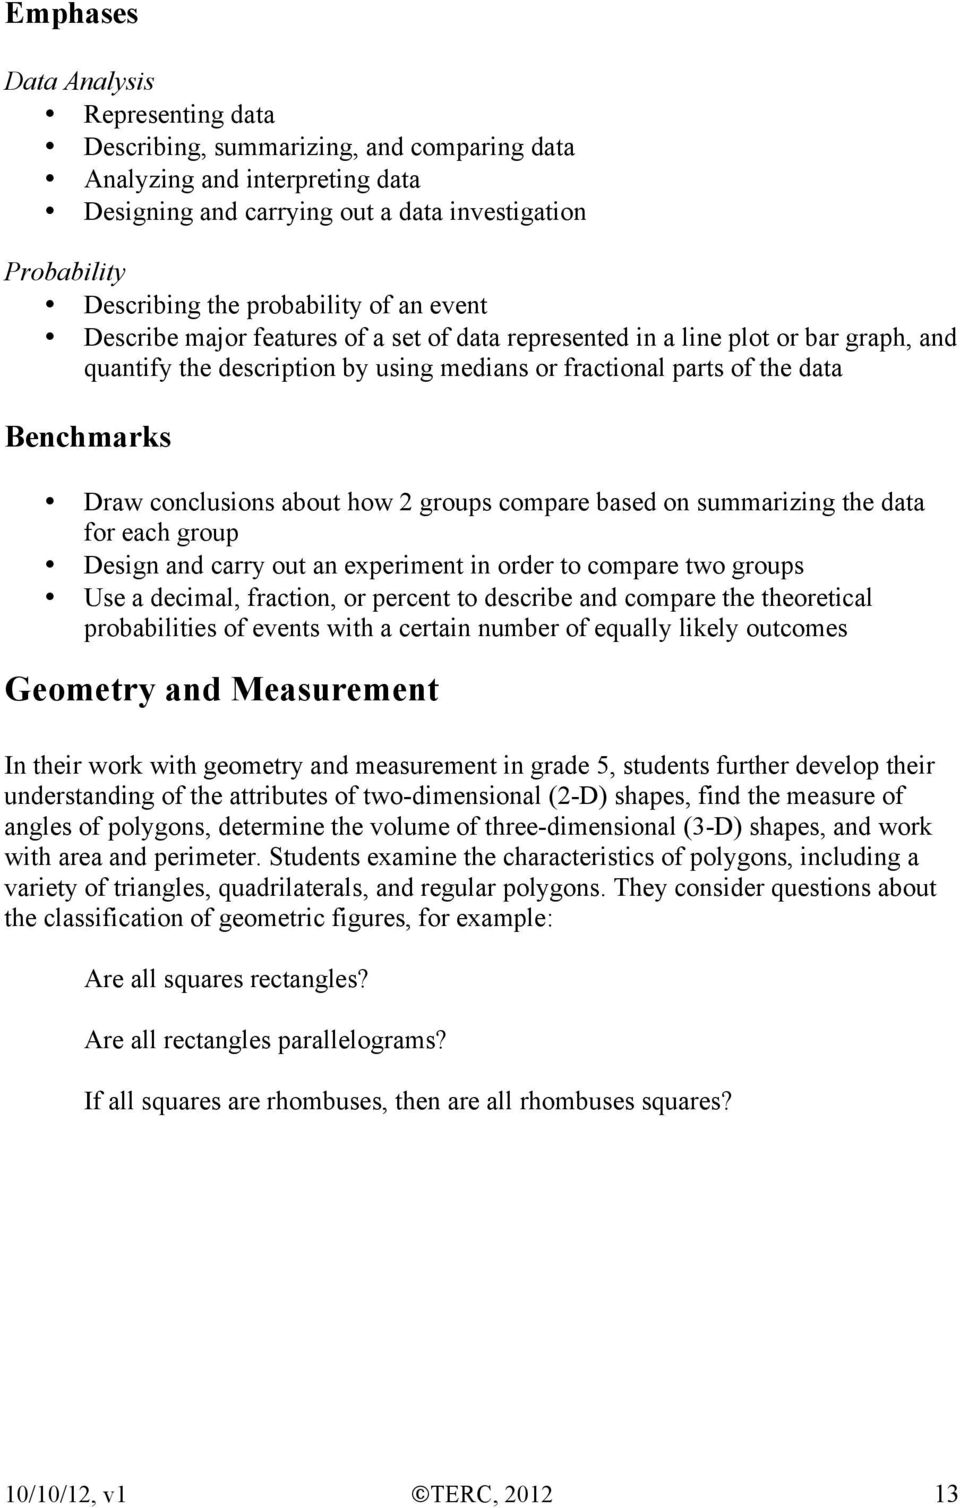 conclusions about how 2 groups compare based on summarizing the data for each group Design and carry out an experiment in order to compare two groups Use a decimal, fraction, or percent to describe